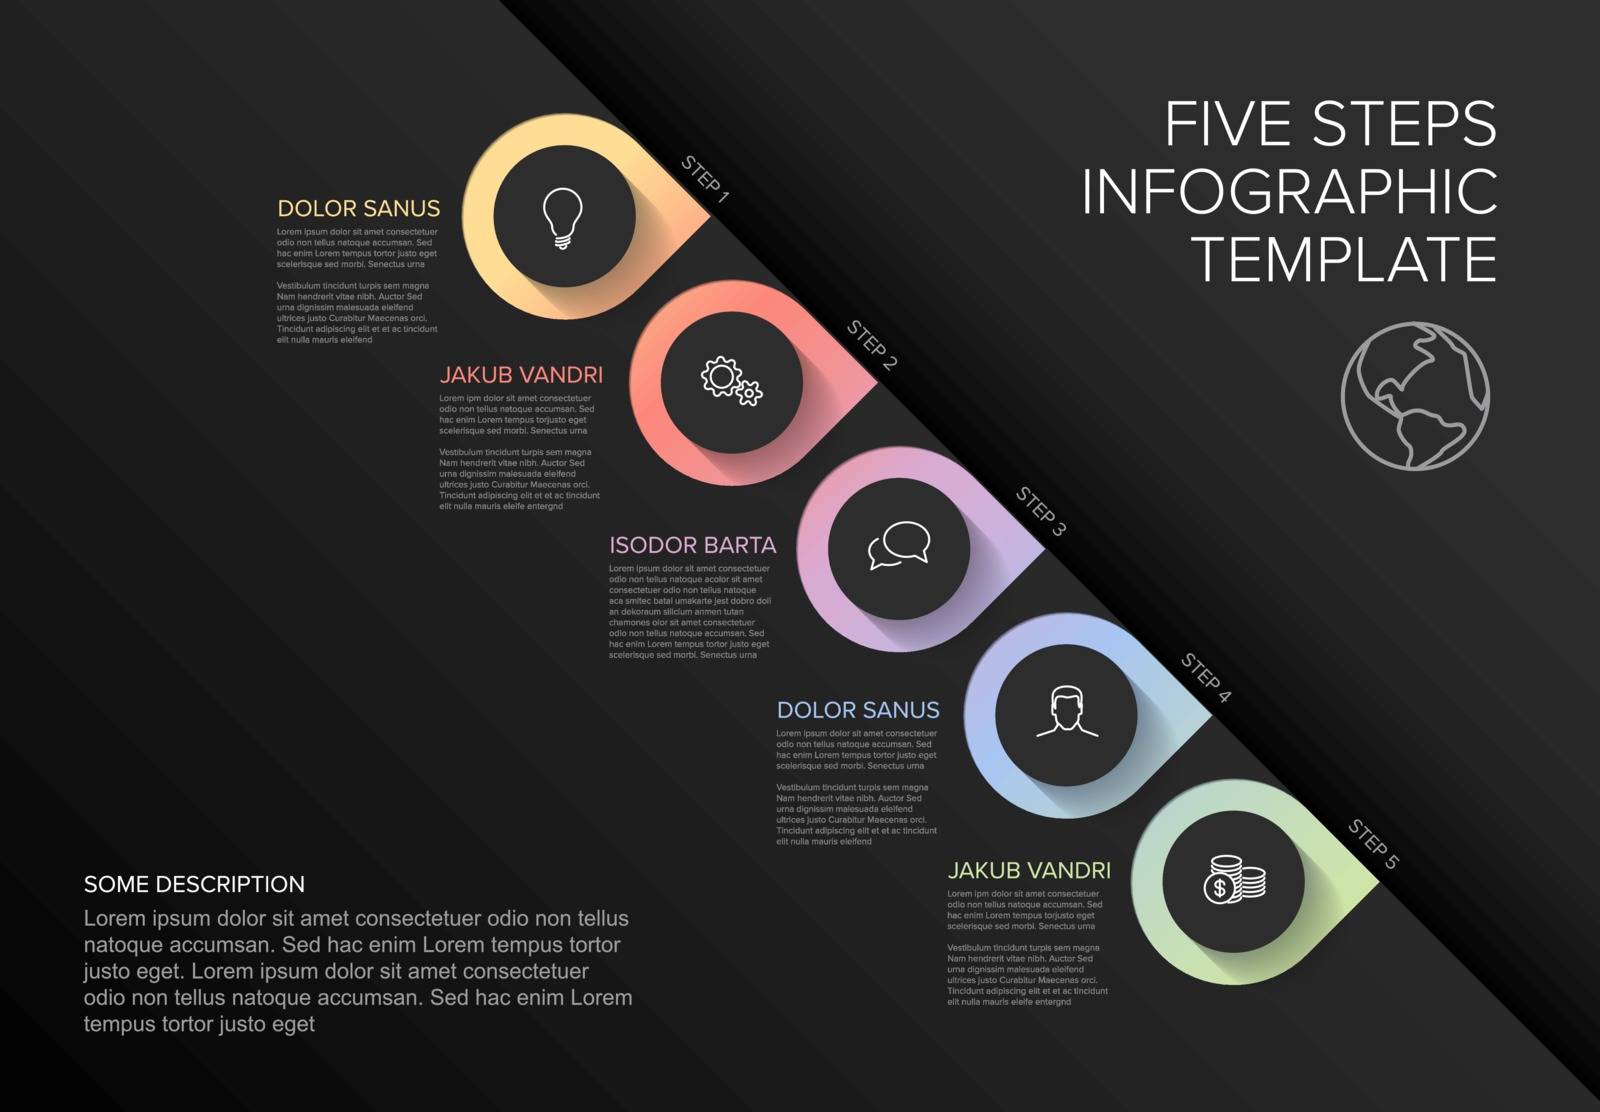 One two three four five - vector diagonal progress template with five steps and description - dark background version